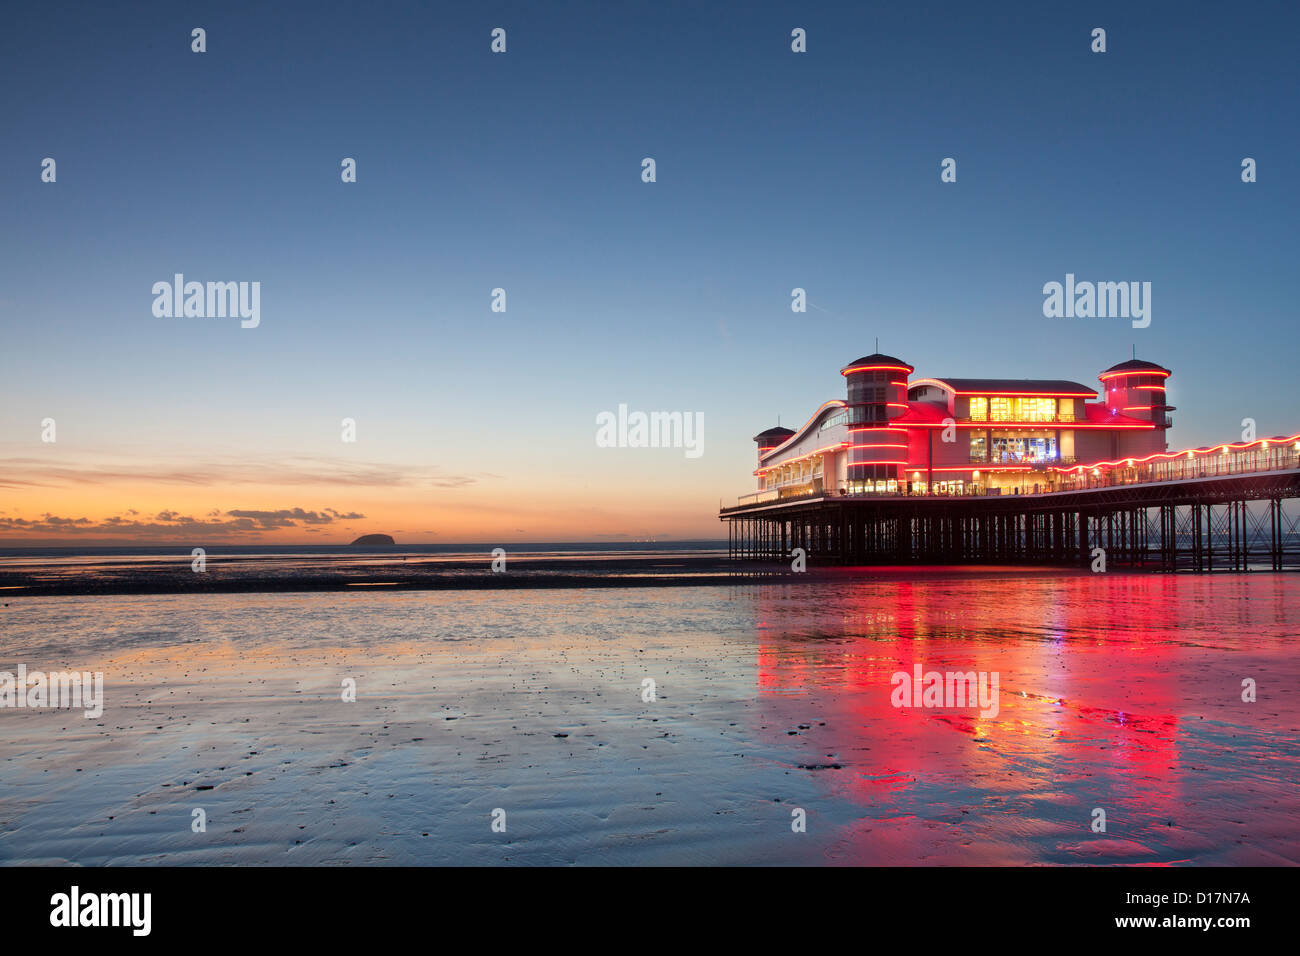 The new Grand Pier at Weston super Mare, Somerset, United Kingdom, at sunset, with reflections in the water. Stock Photo